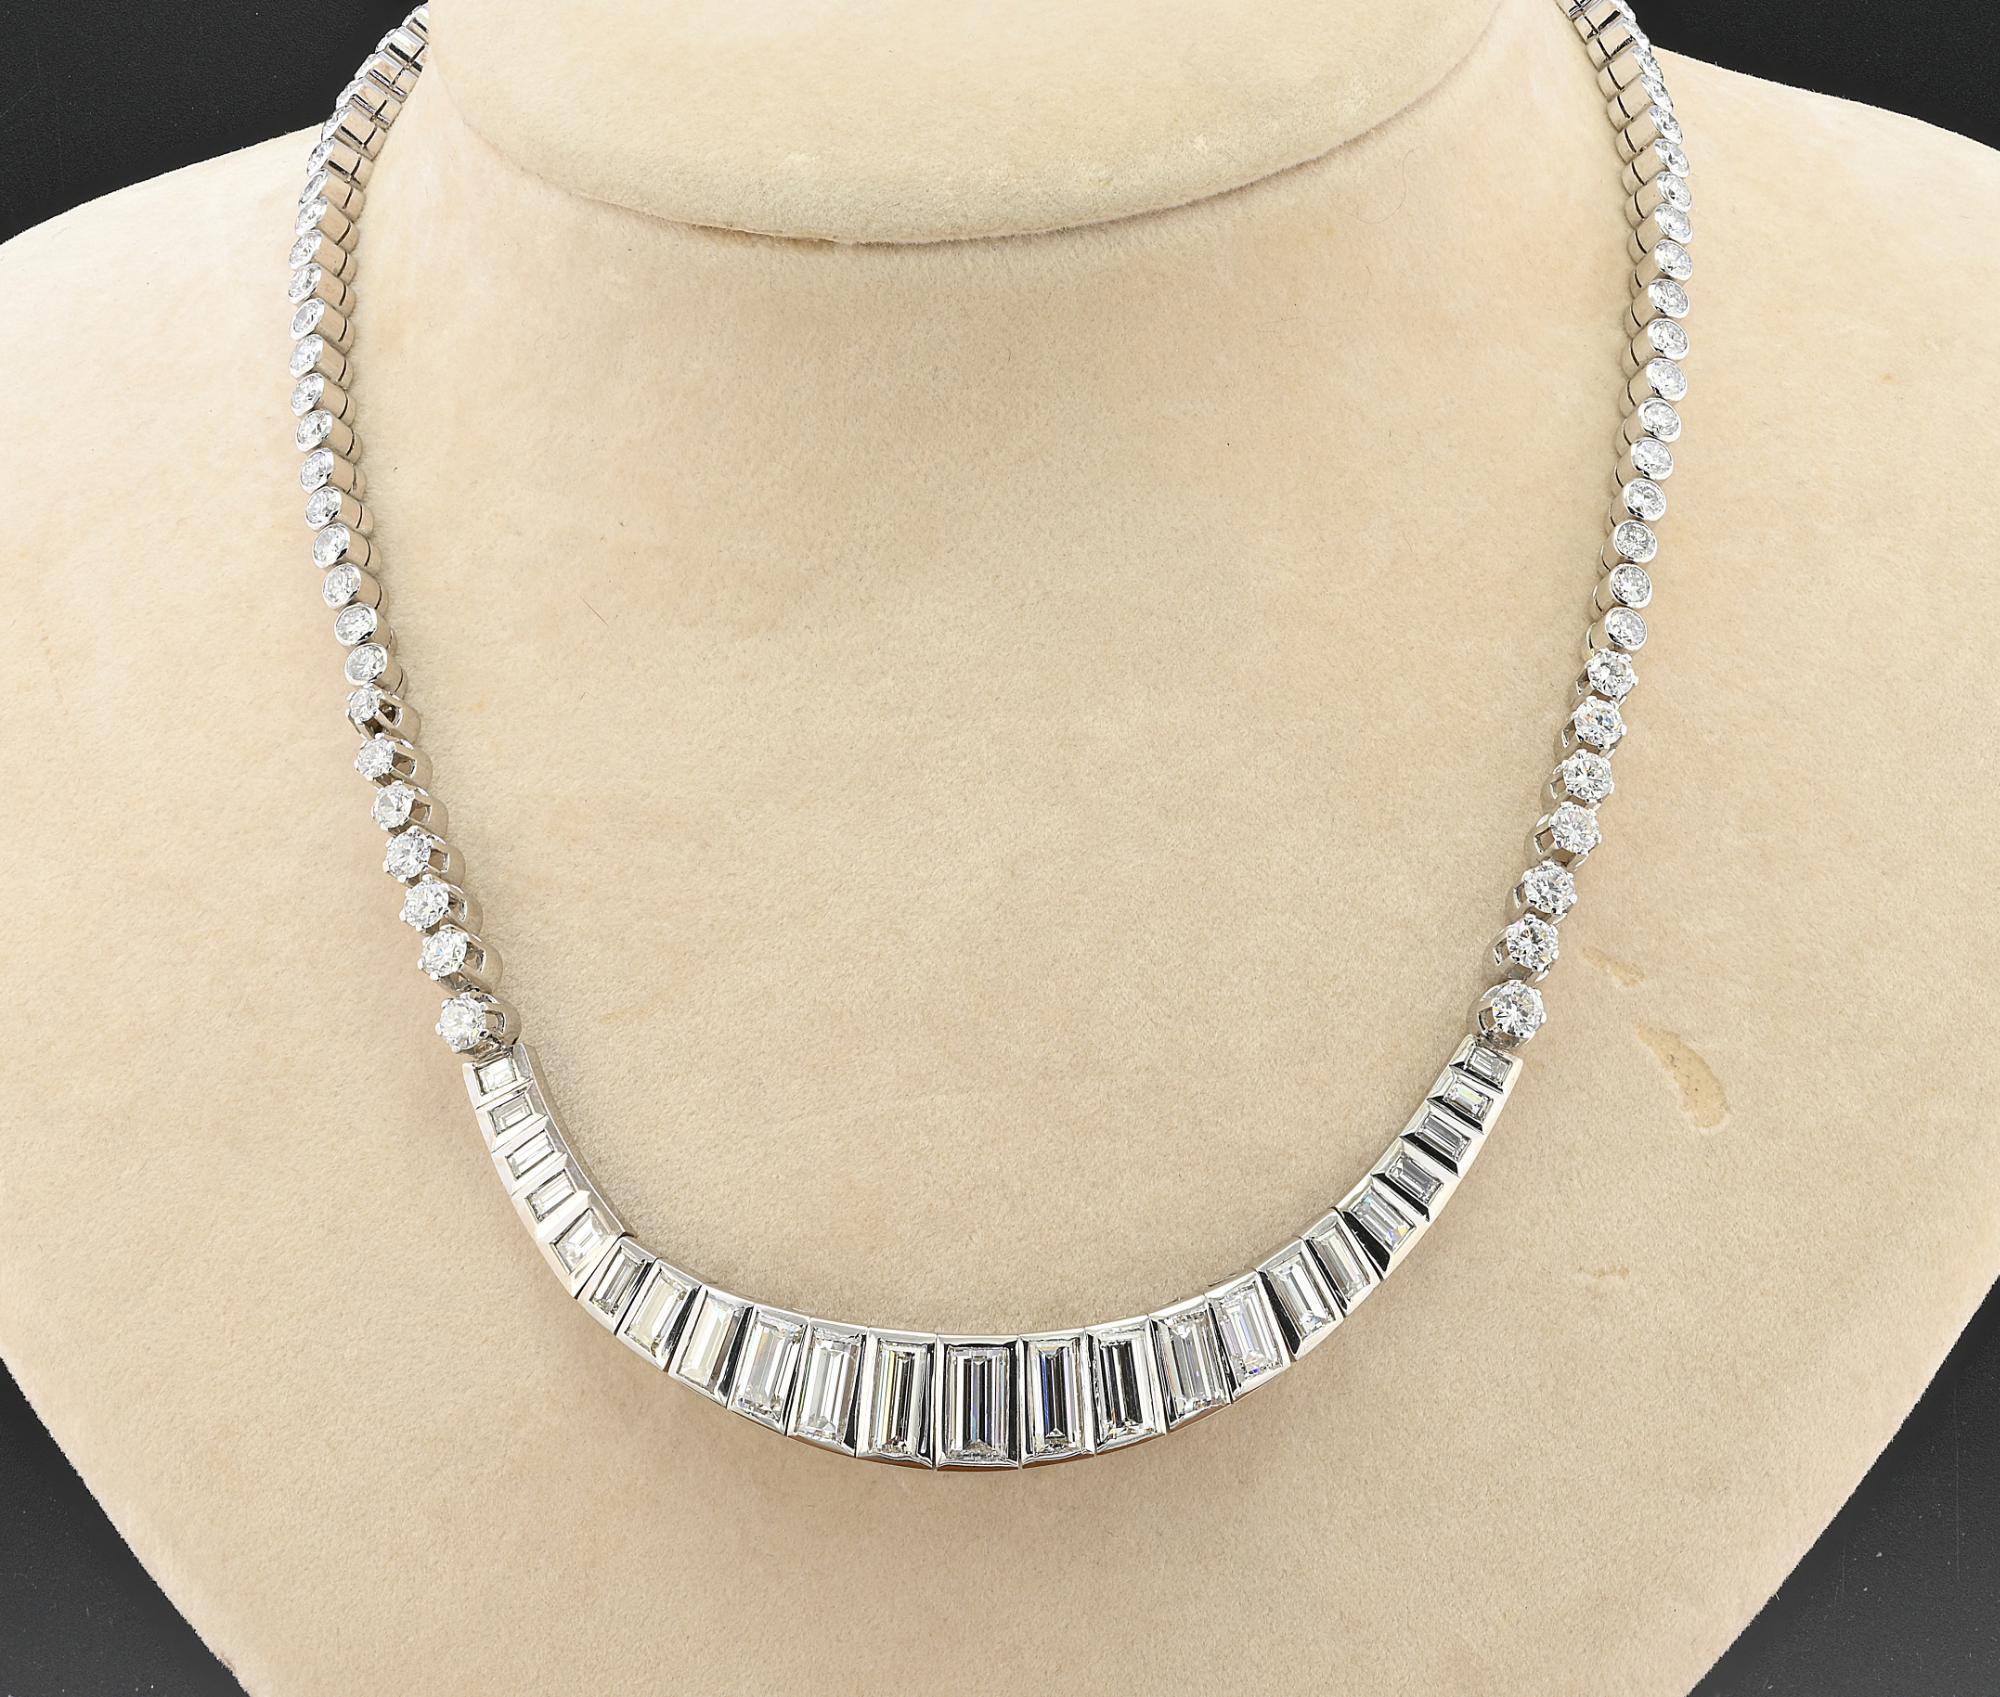 Extraordinary late Deco riviere necklace, 1935 circa
Beautifully hand crafted as unique example of solid 18 KT white gold
Displayed in the middle neckline a selection of bright white and full of sparkle graduated baguette Diamonds 27 in number